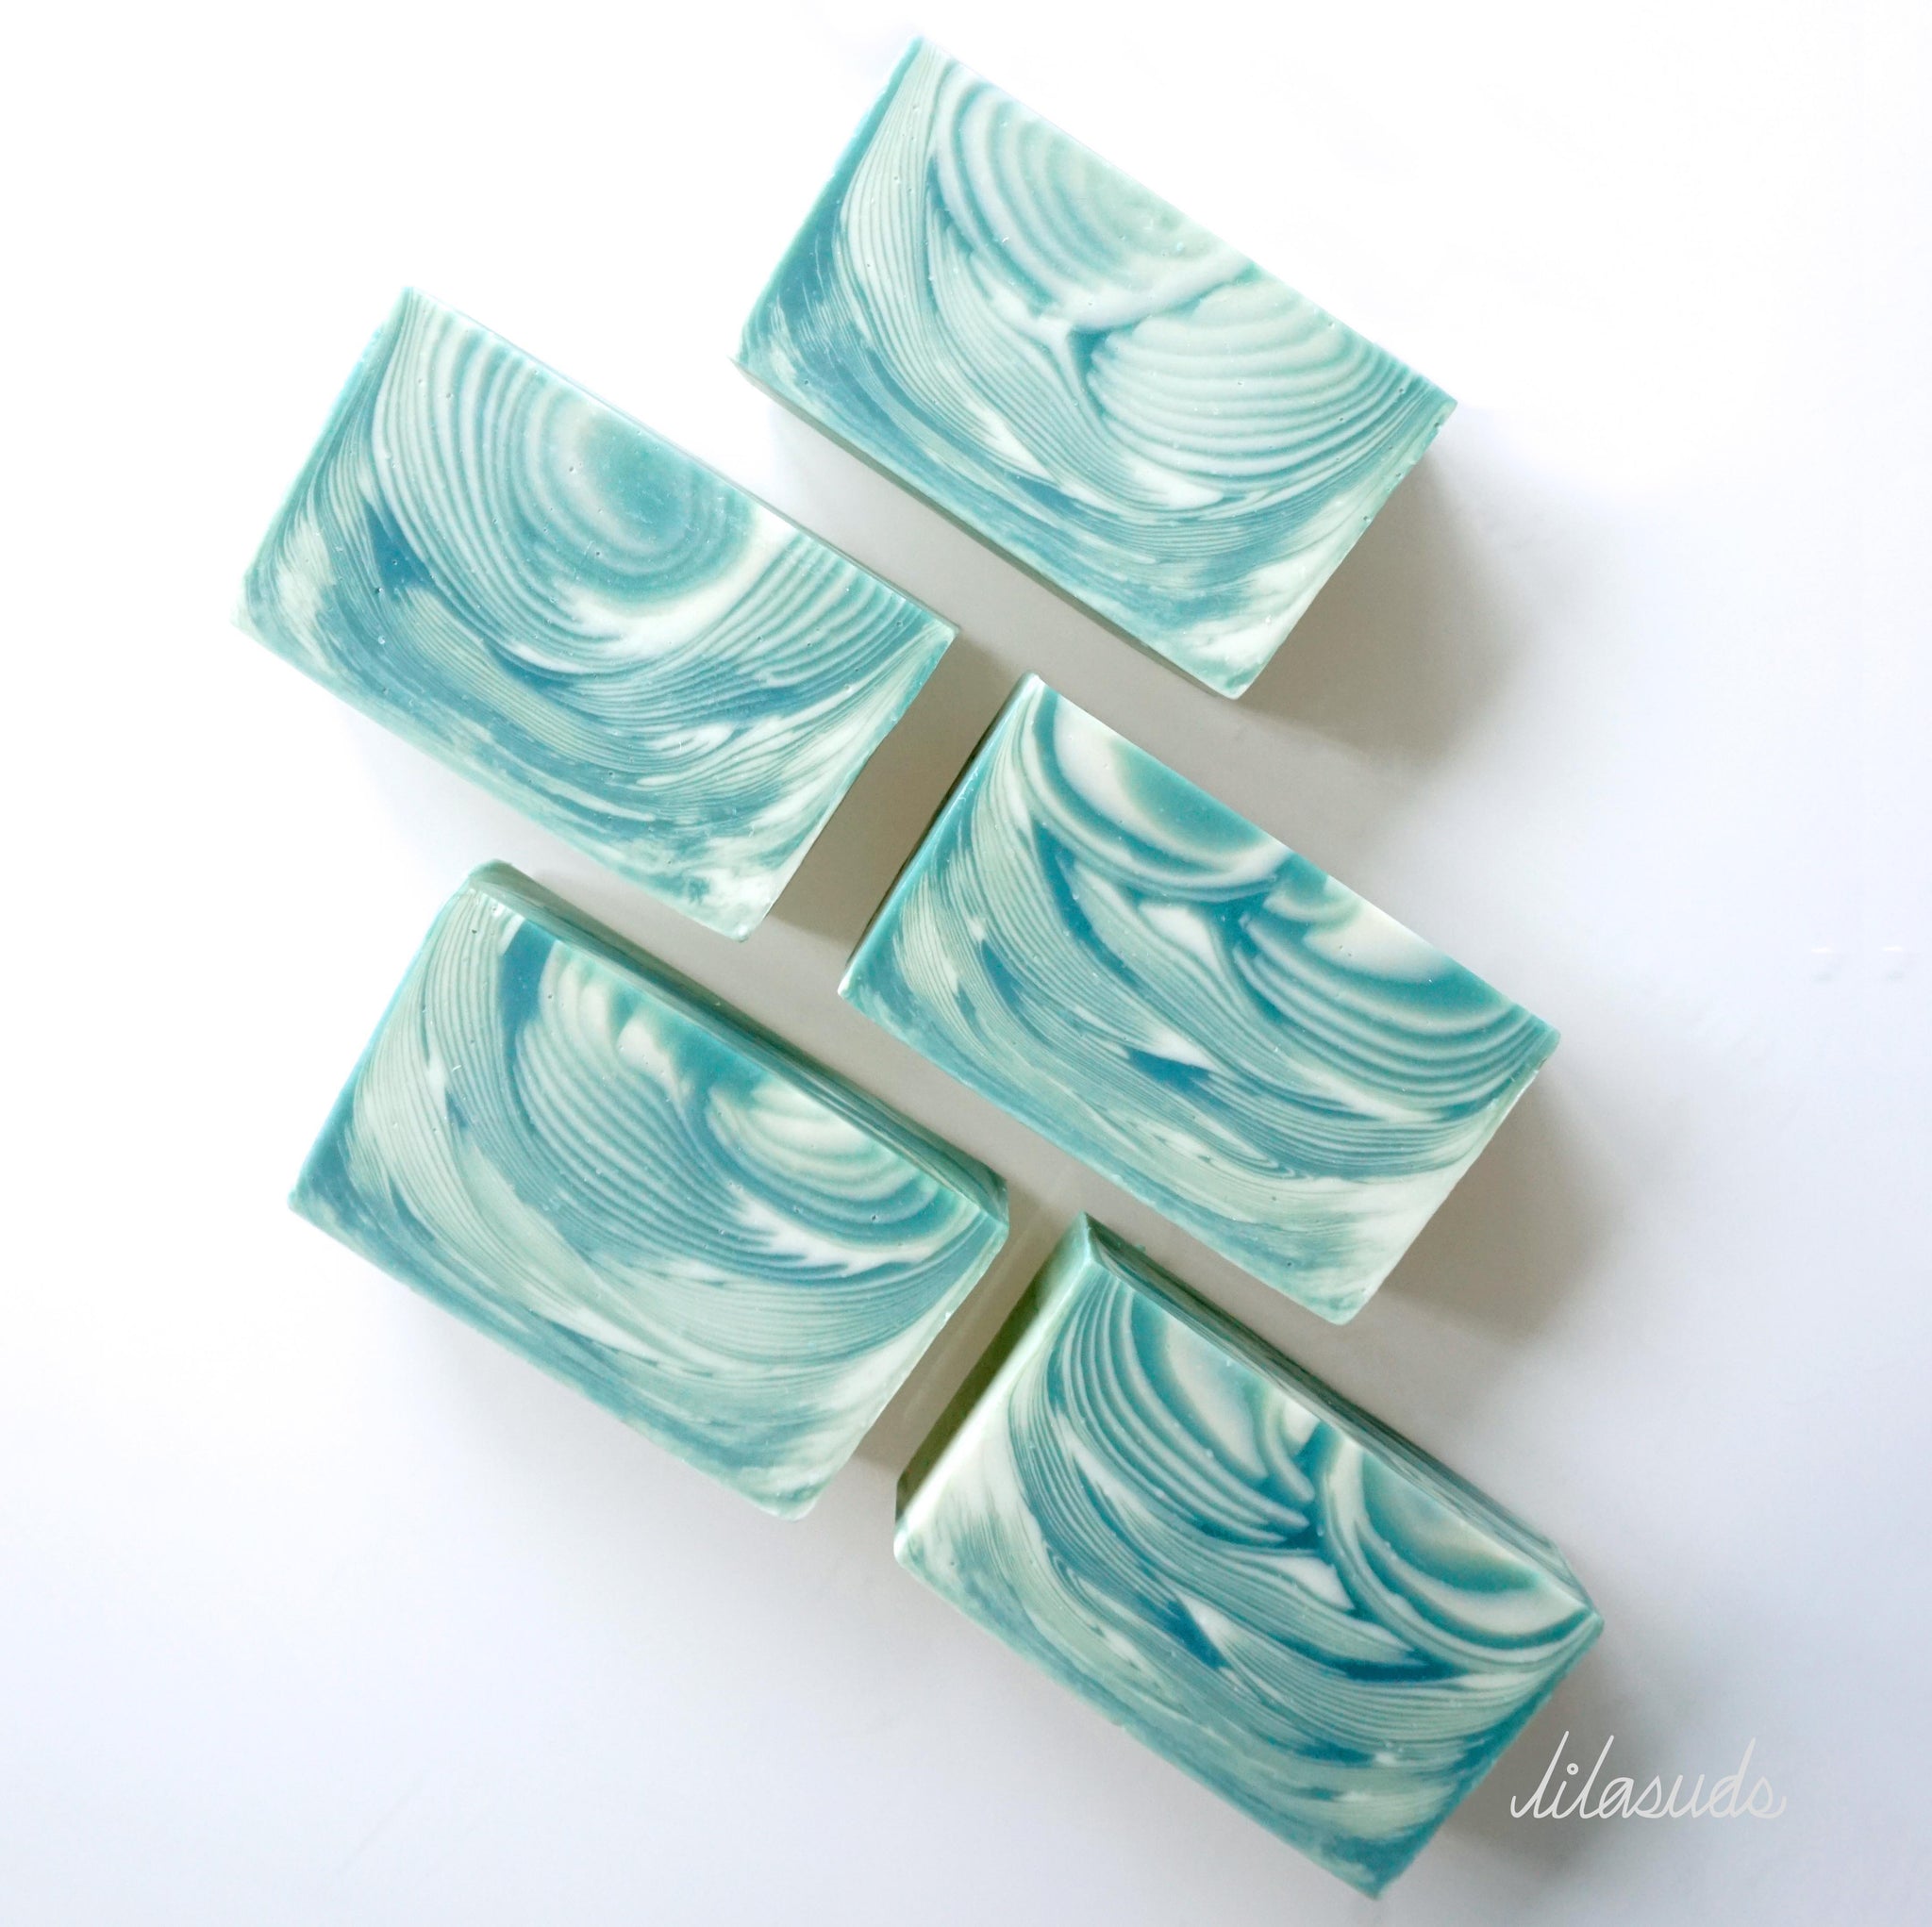 My first Soap Challenge Club- Clamshell Technique